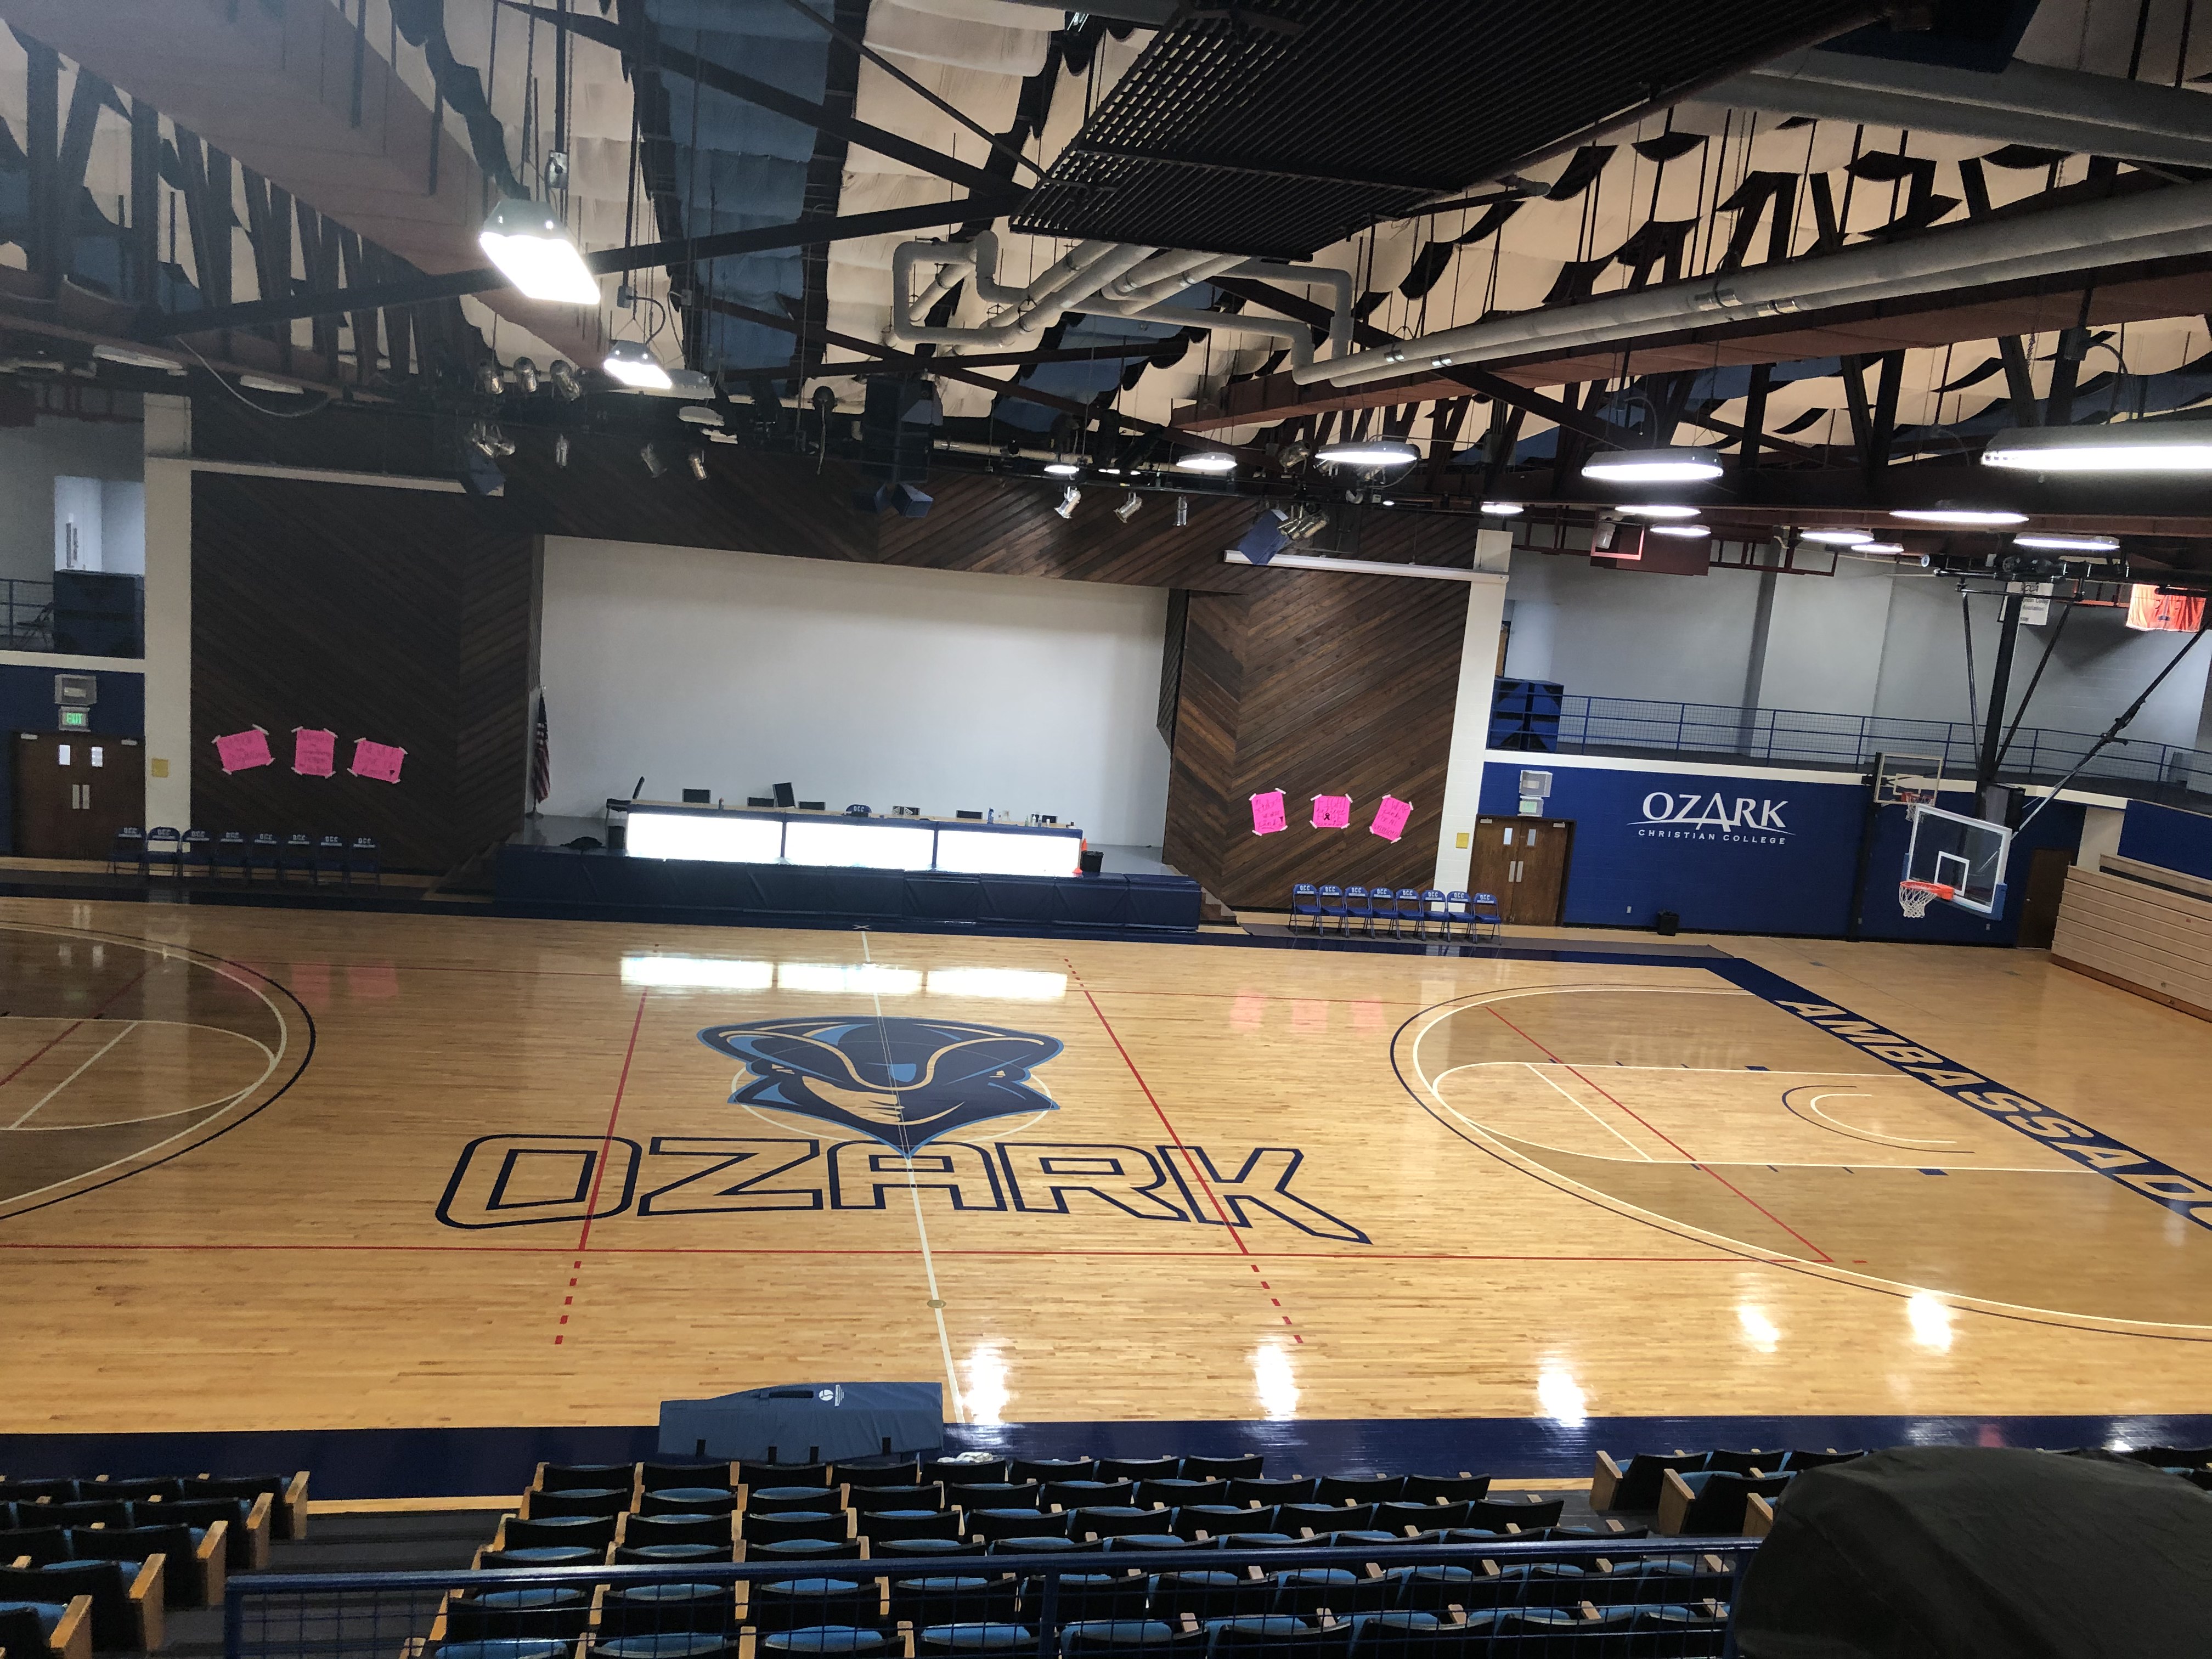 View of the gym from the stadium seat